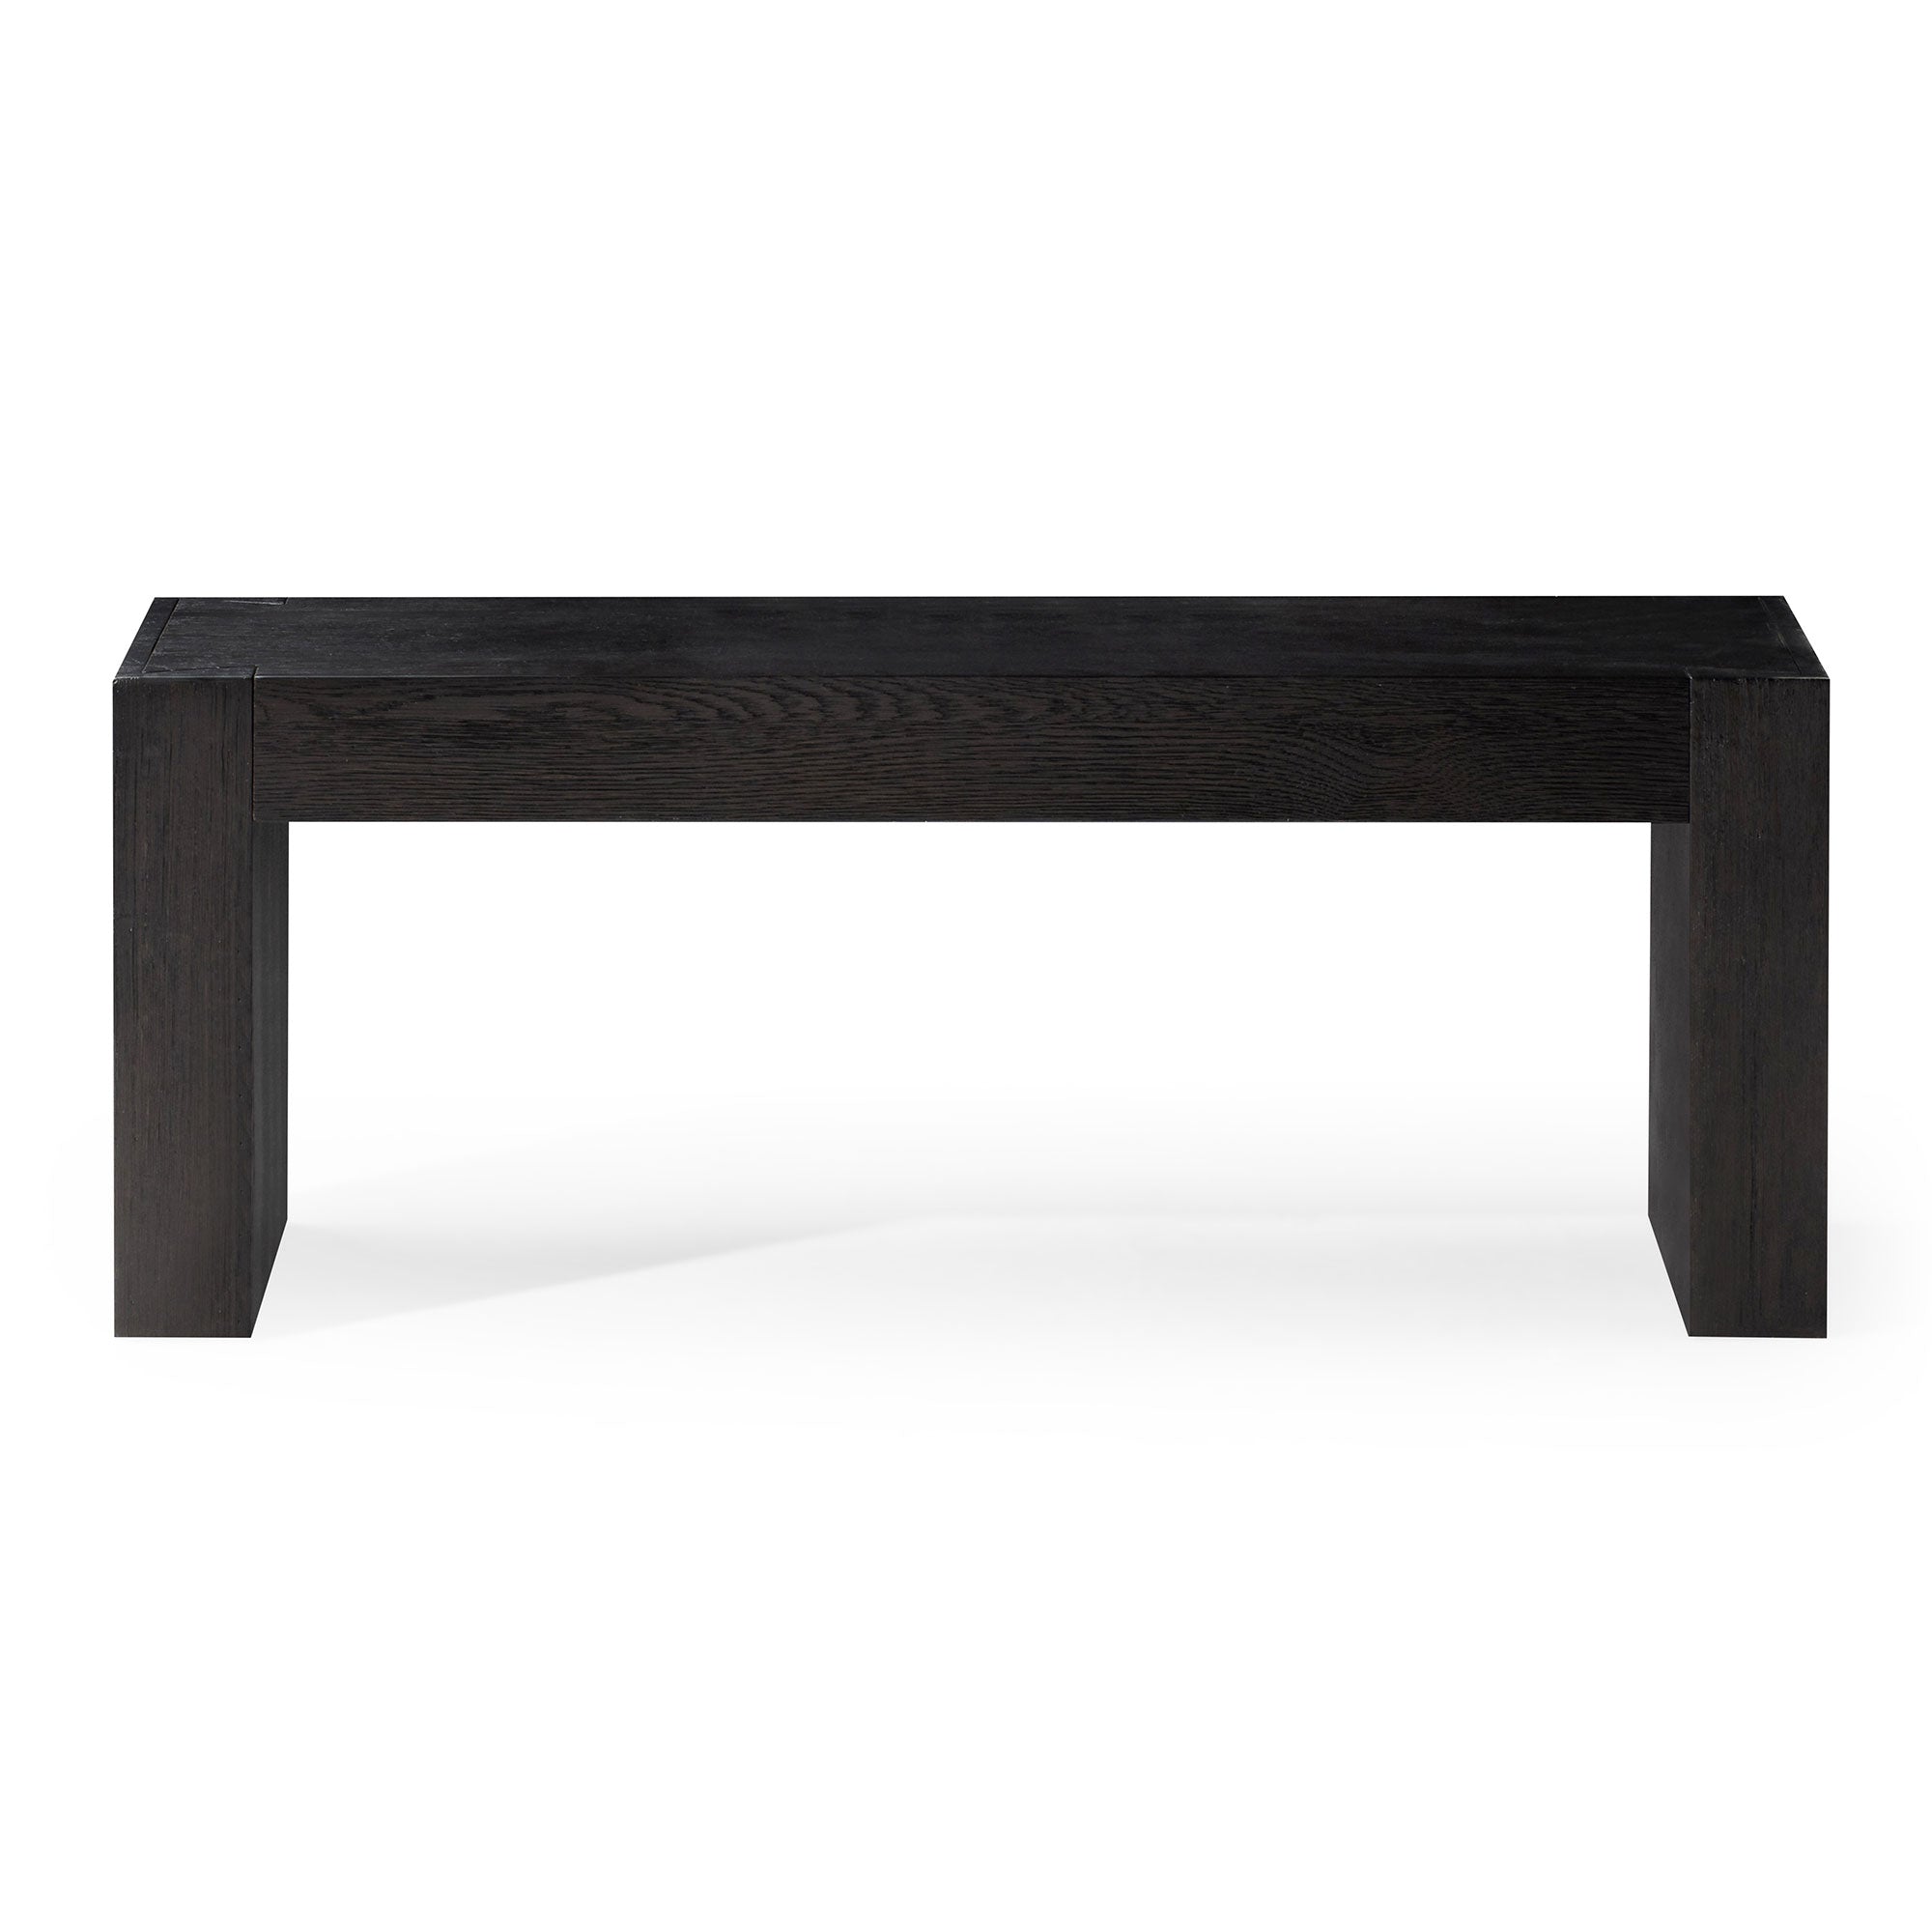 Zeno Organic Wooden Bench in Weathered Black Finish in Ottomans & Benches by Maven Lane